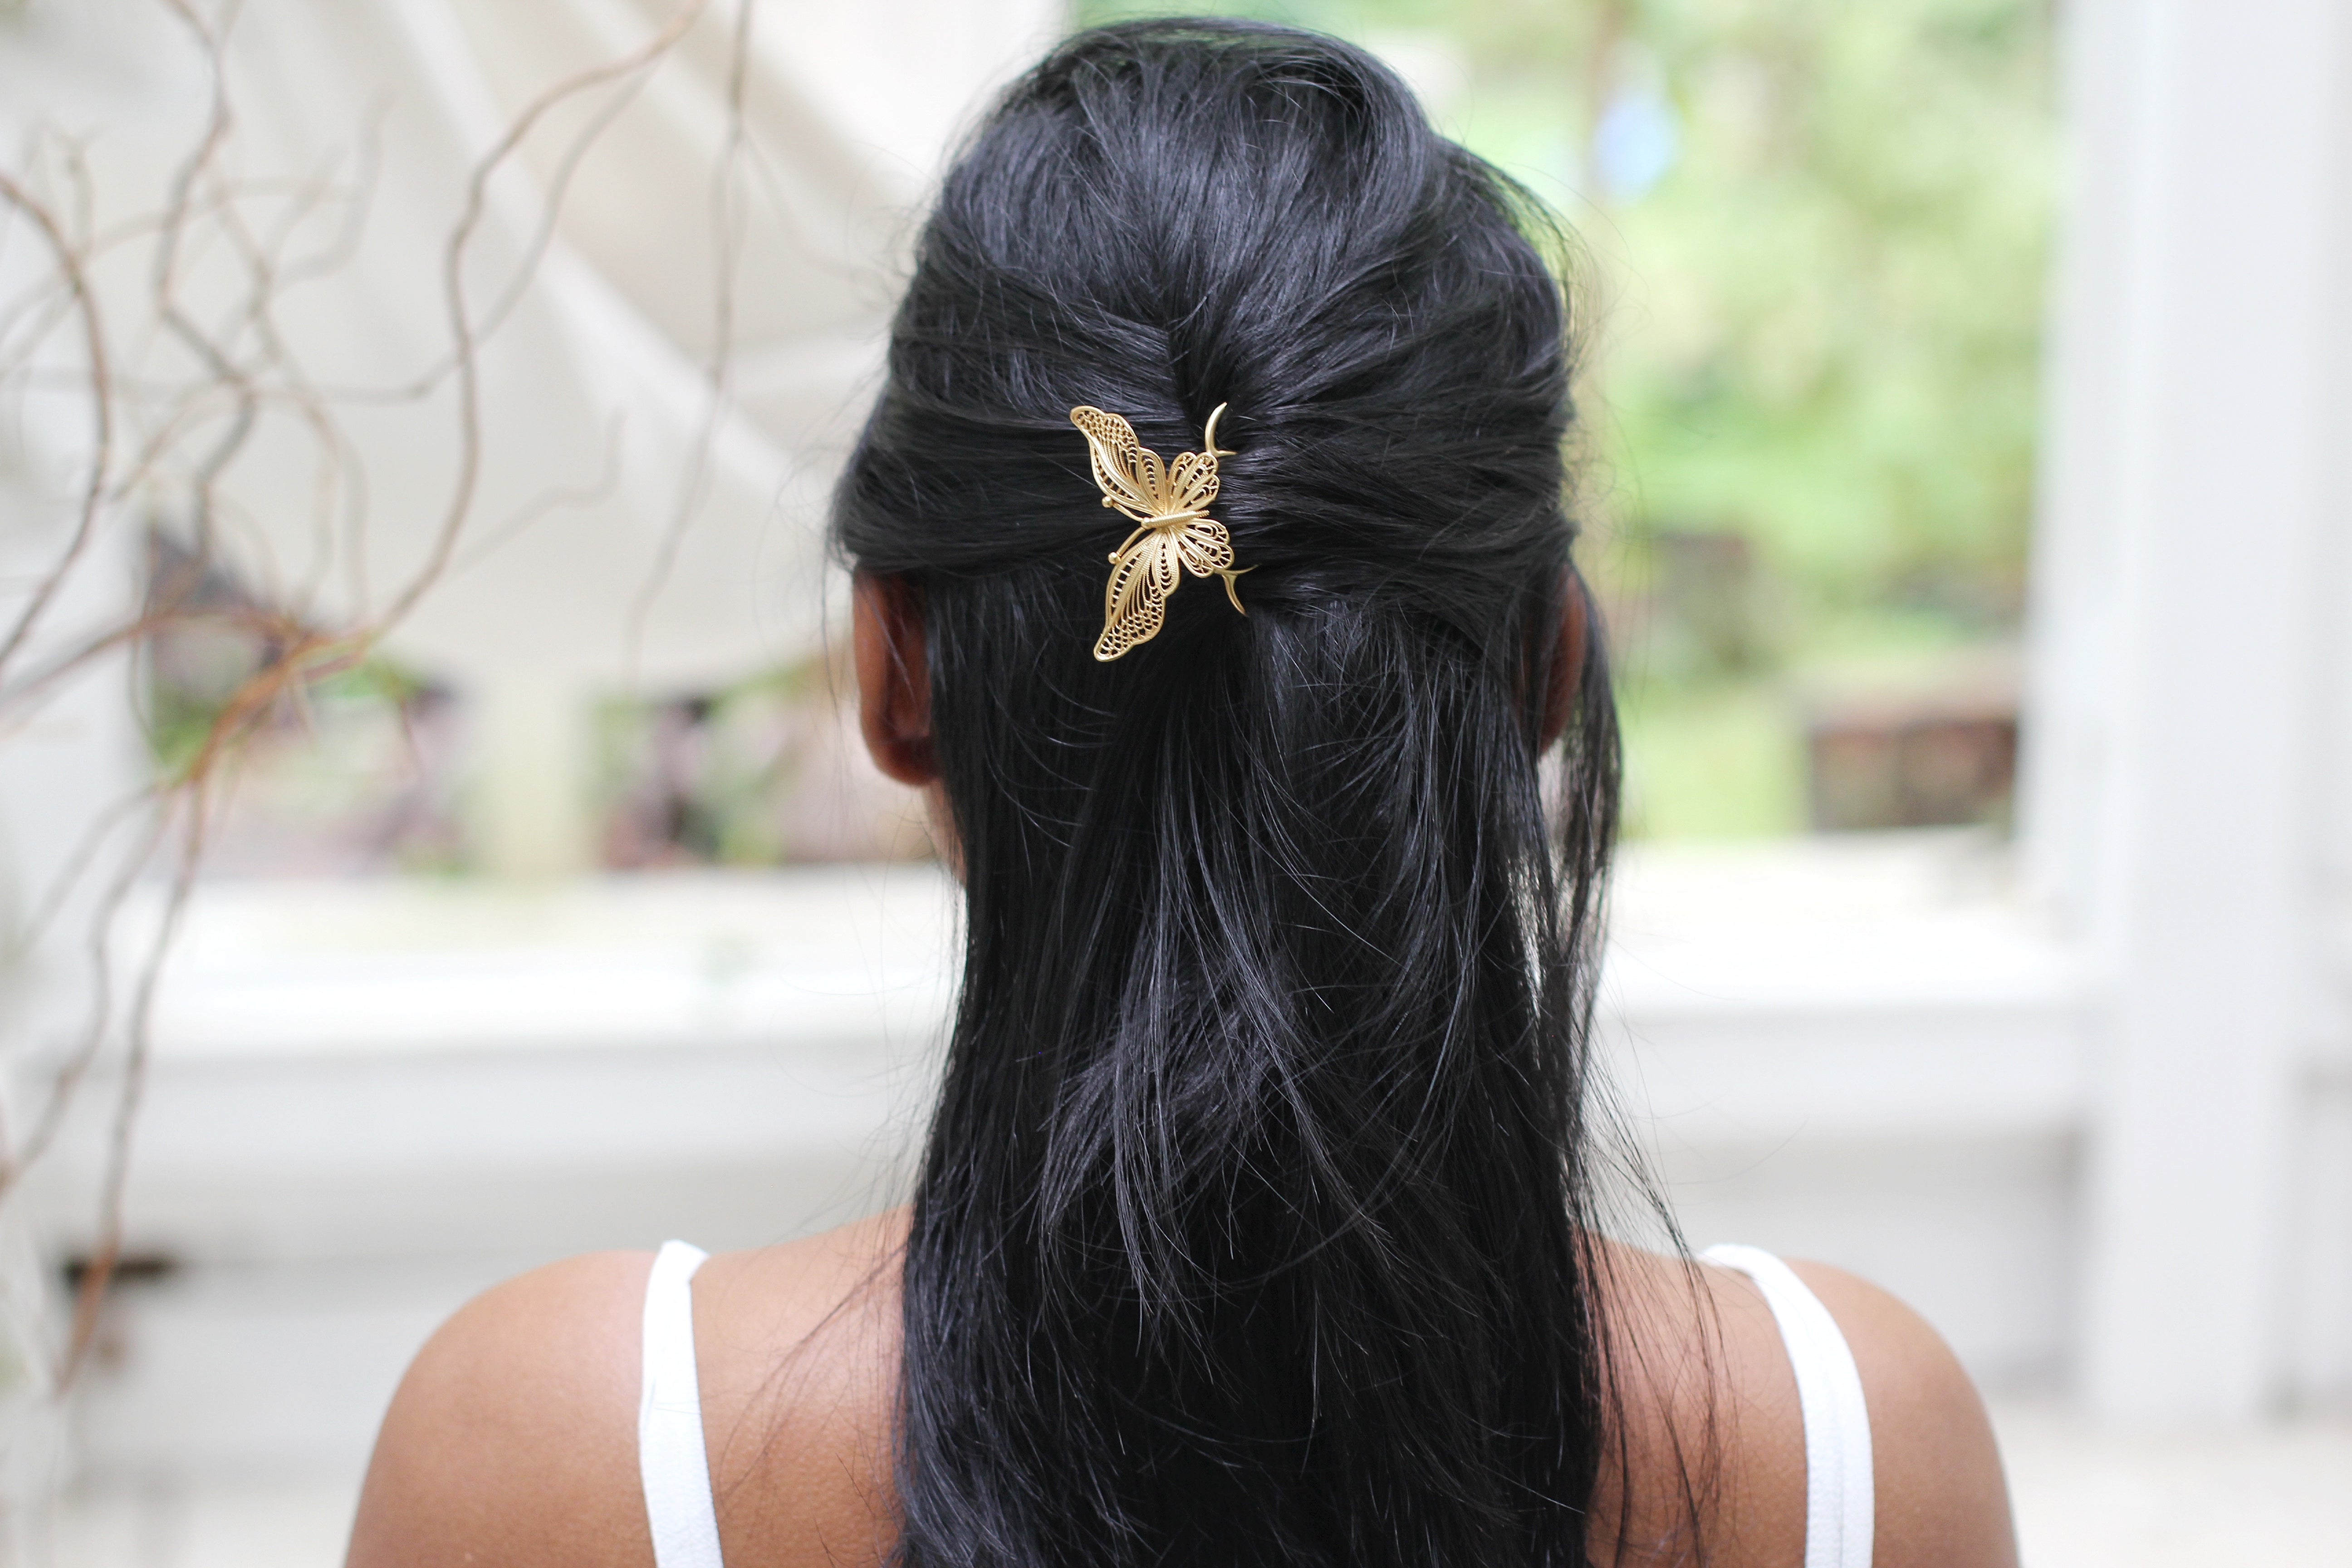 Large Filigree Butterfly Hair Prong